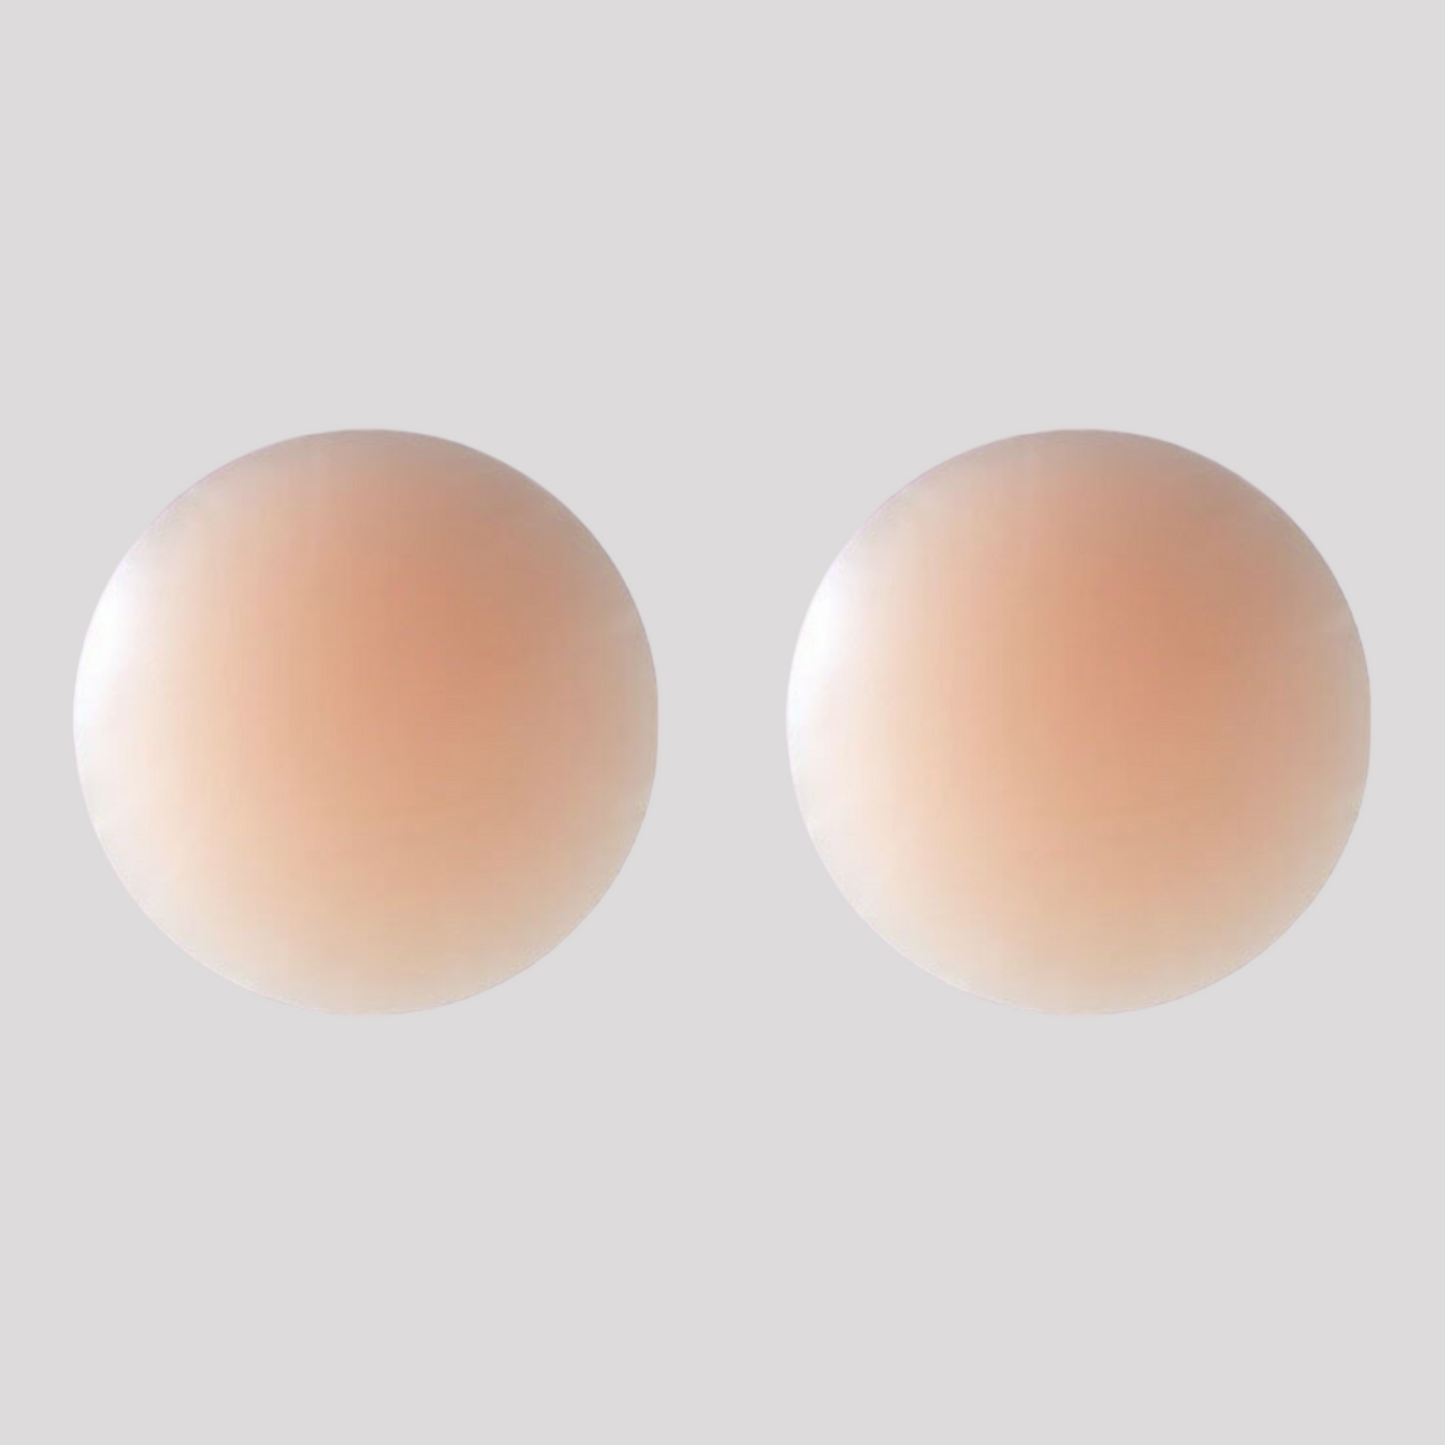 Invisible Self Adhesive Silicone Nipple Covers